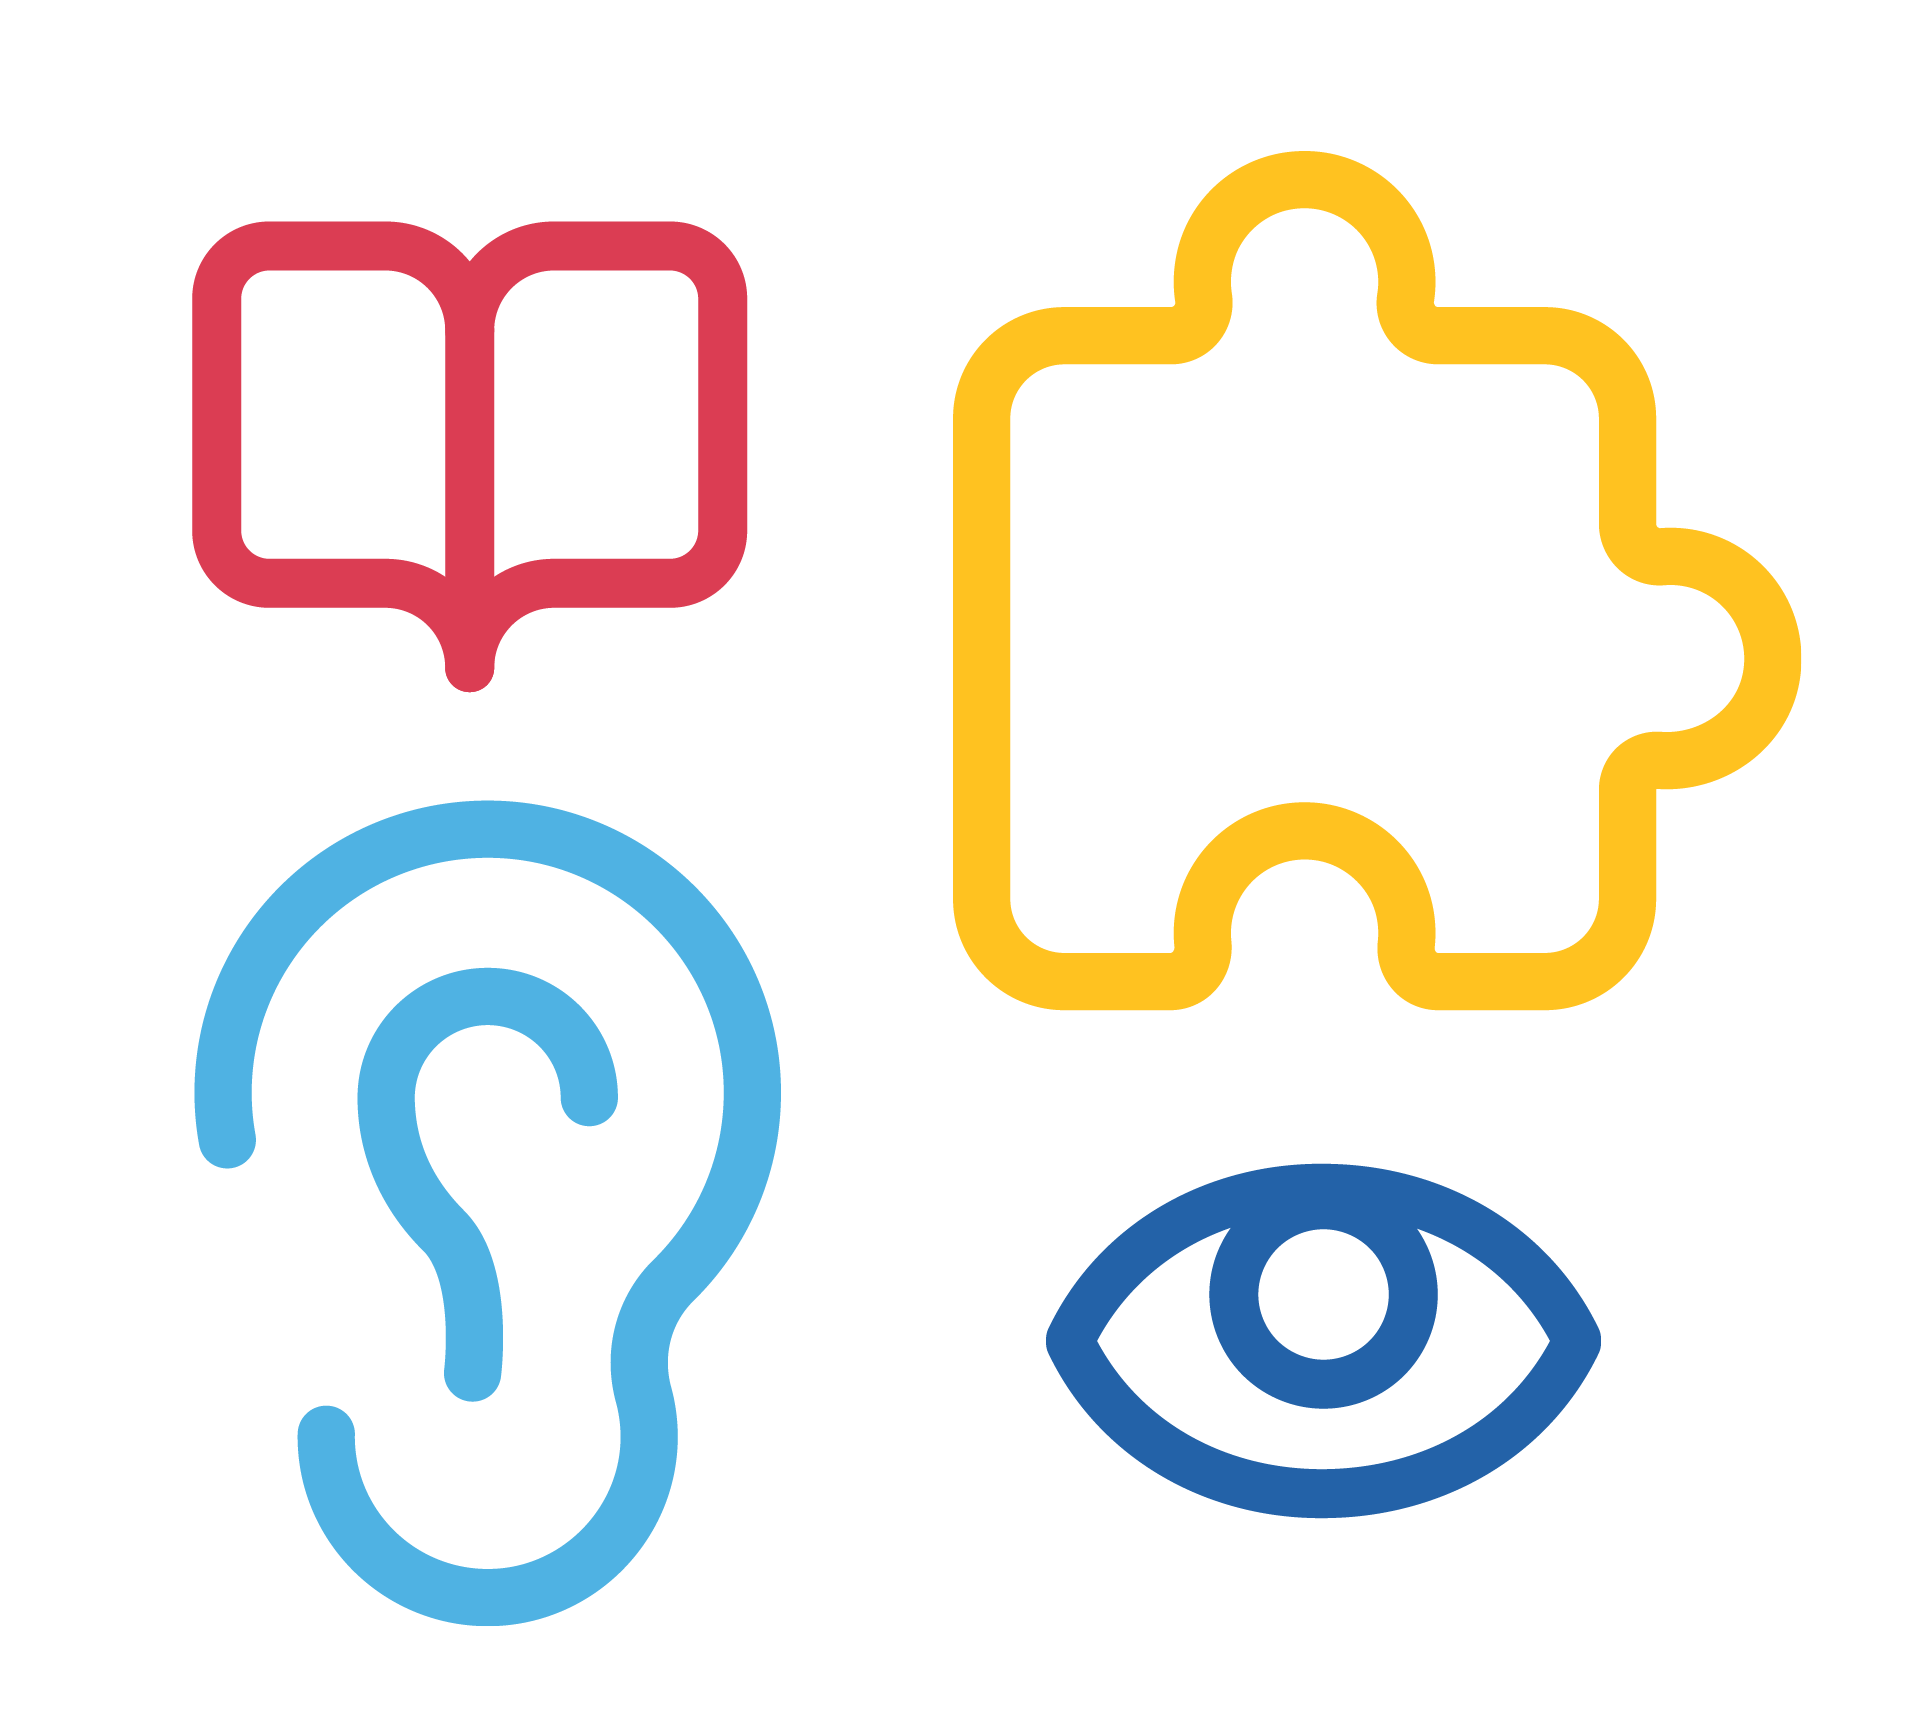 Icons representing human senses: an open book for reading, a puzzle piece for touch, an ear for hearing, and an eye for sight, in colorful outlines.